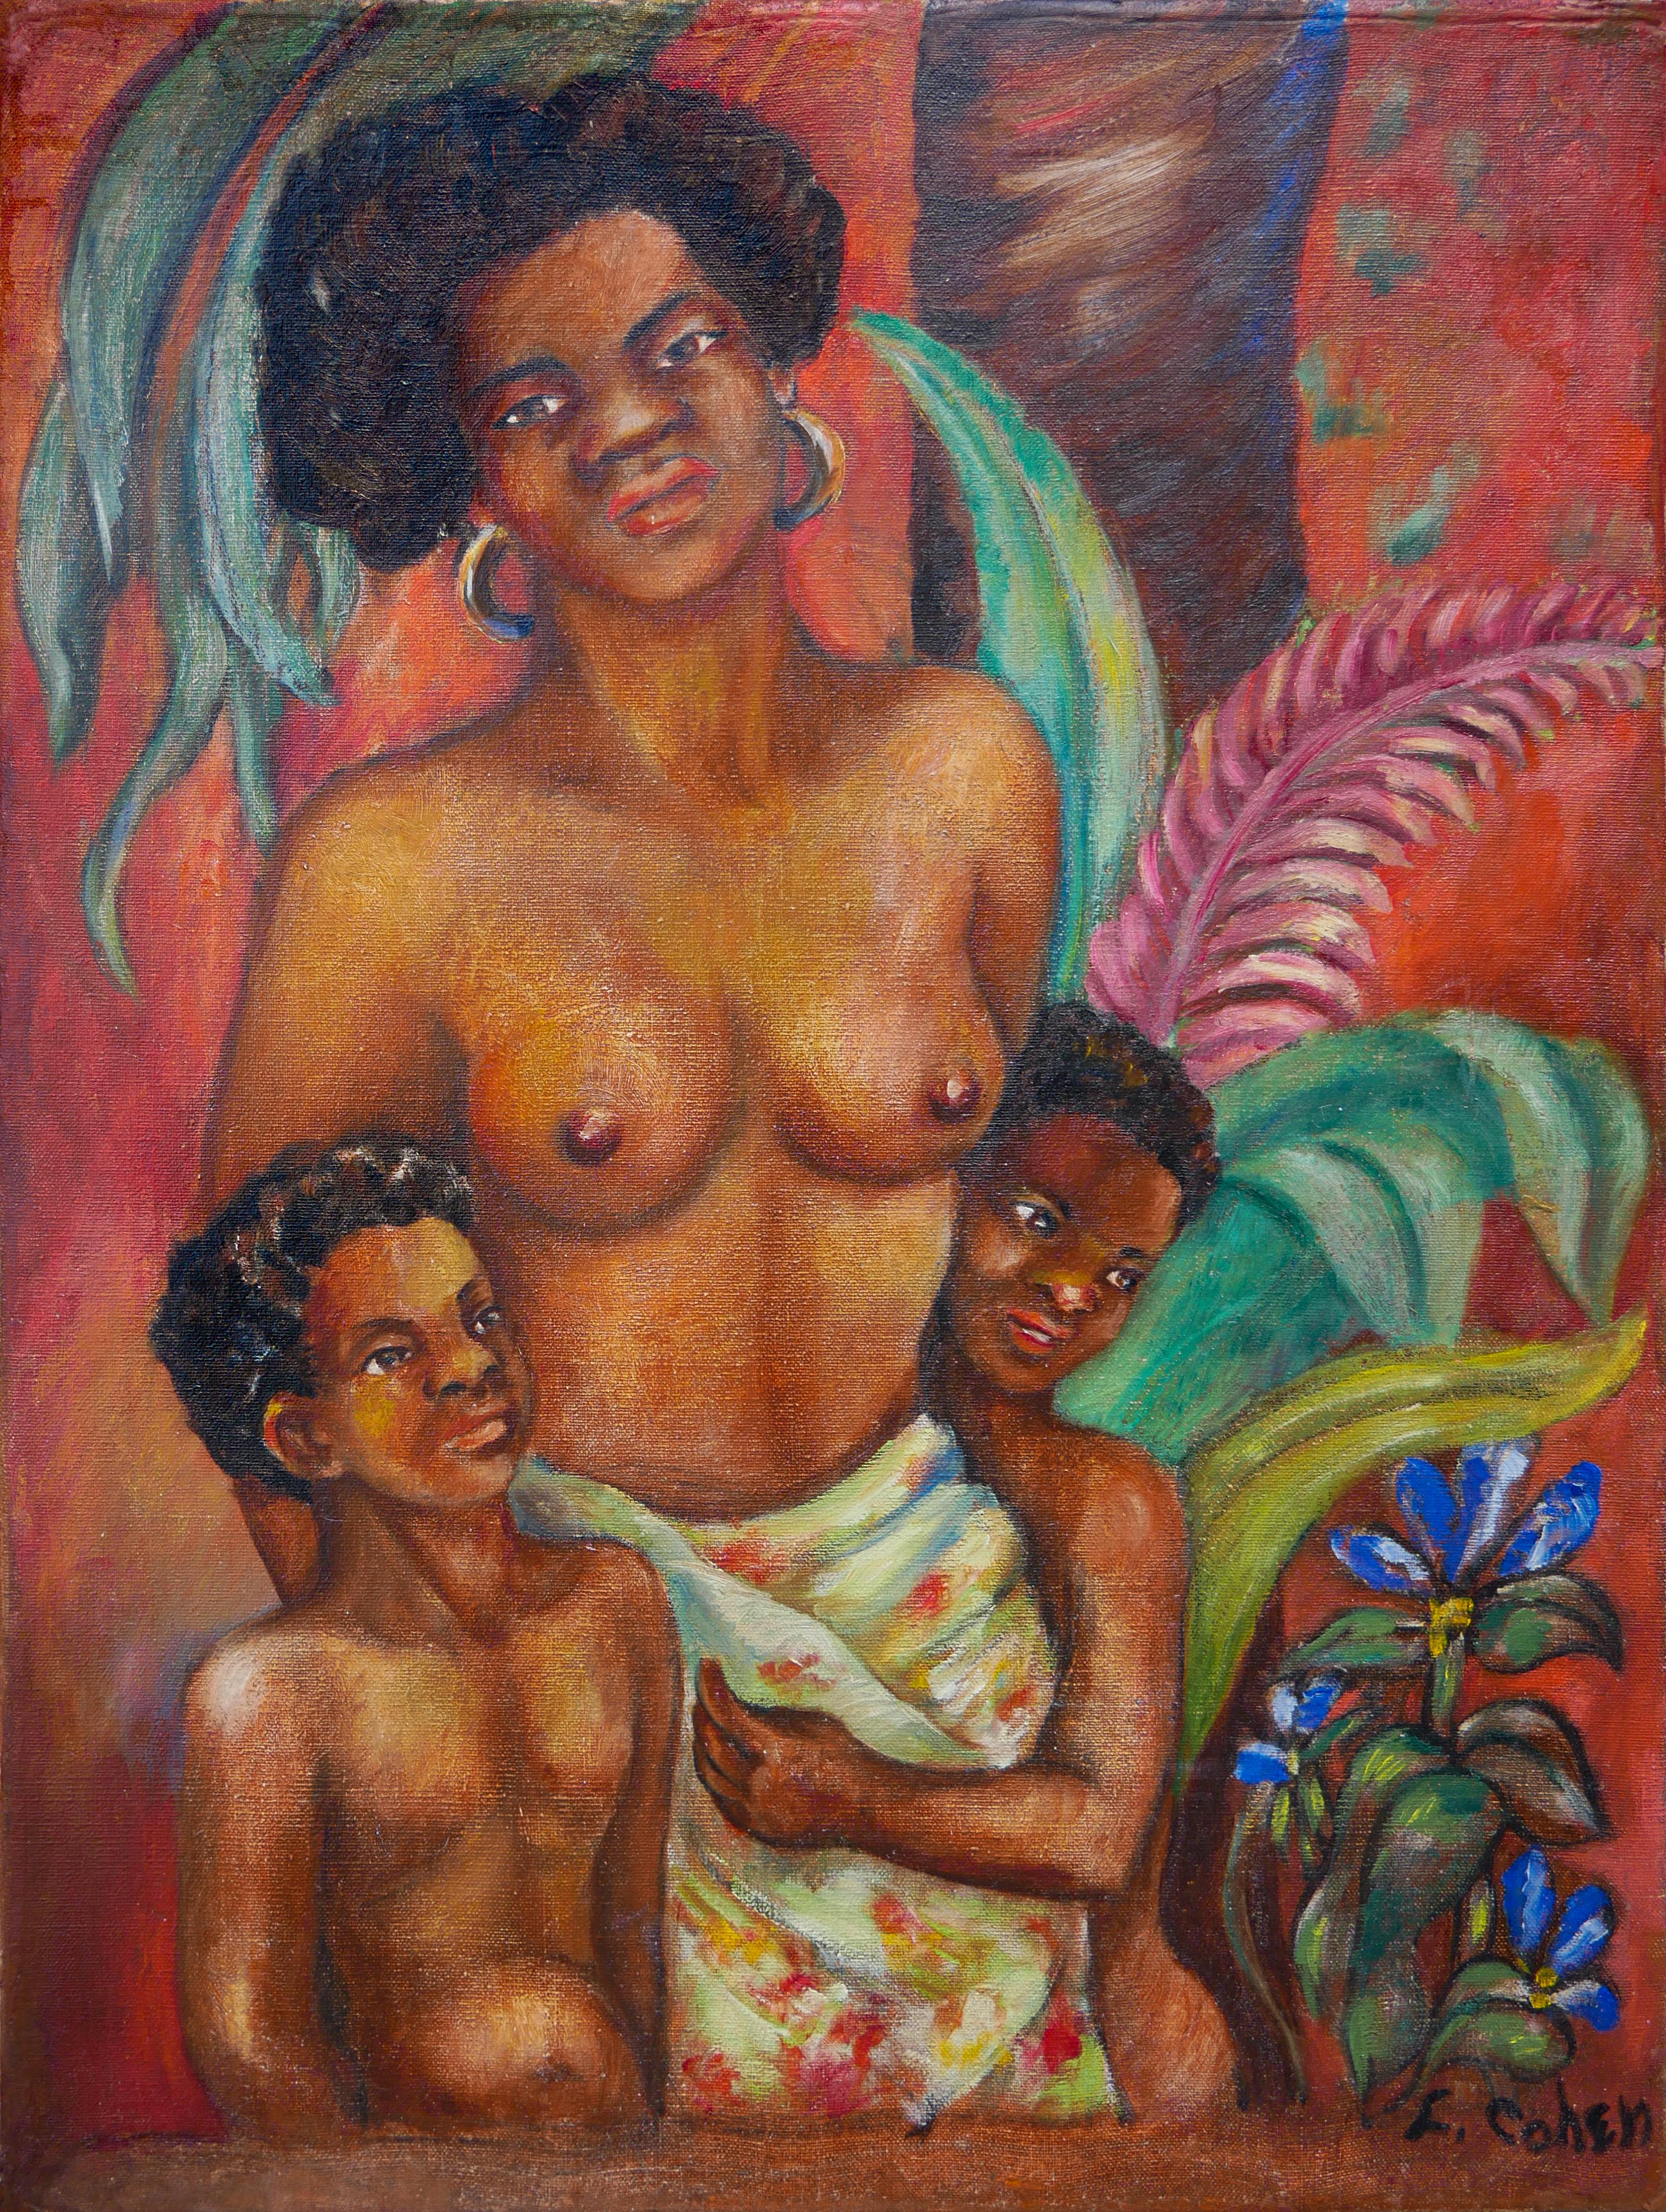 F. Cohen Figurative Painting - Warm-Toned Abstract Figurative Black Art Portrait of a Mother with Children